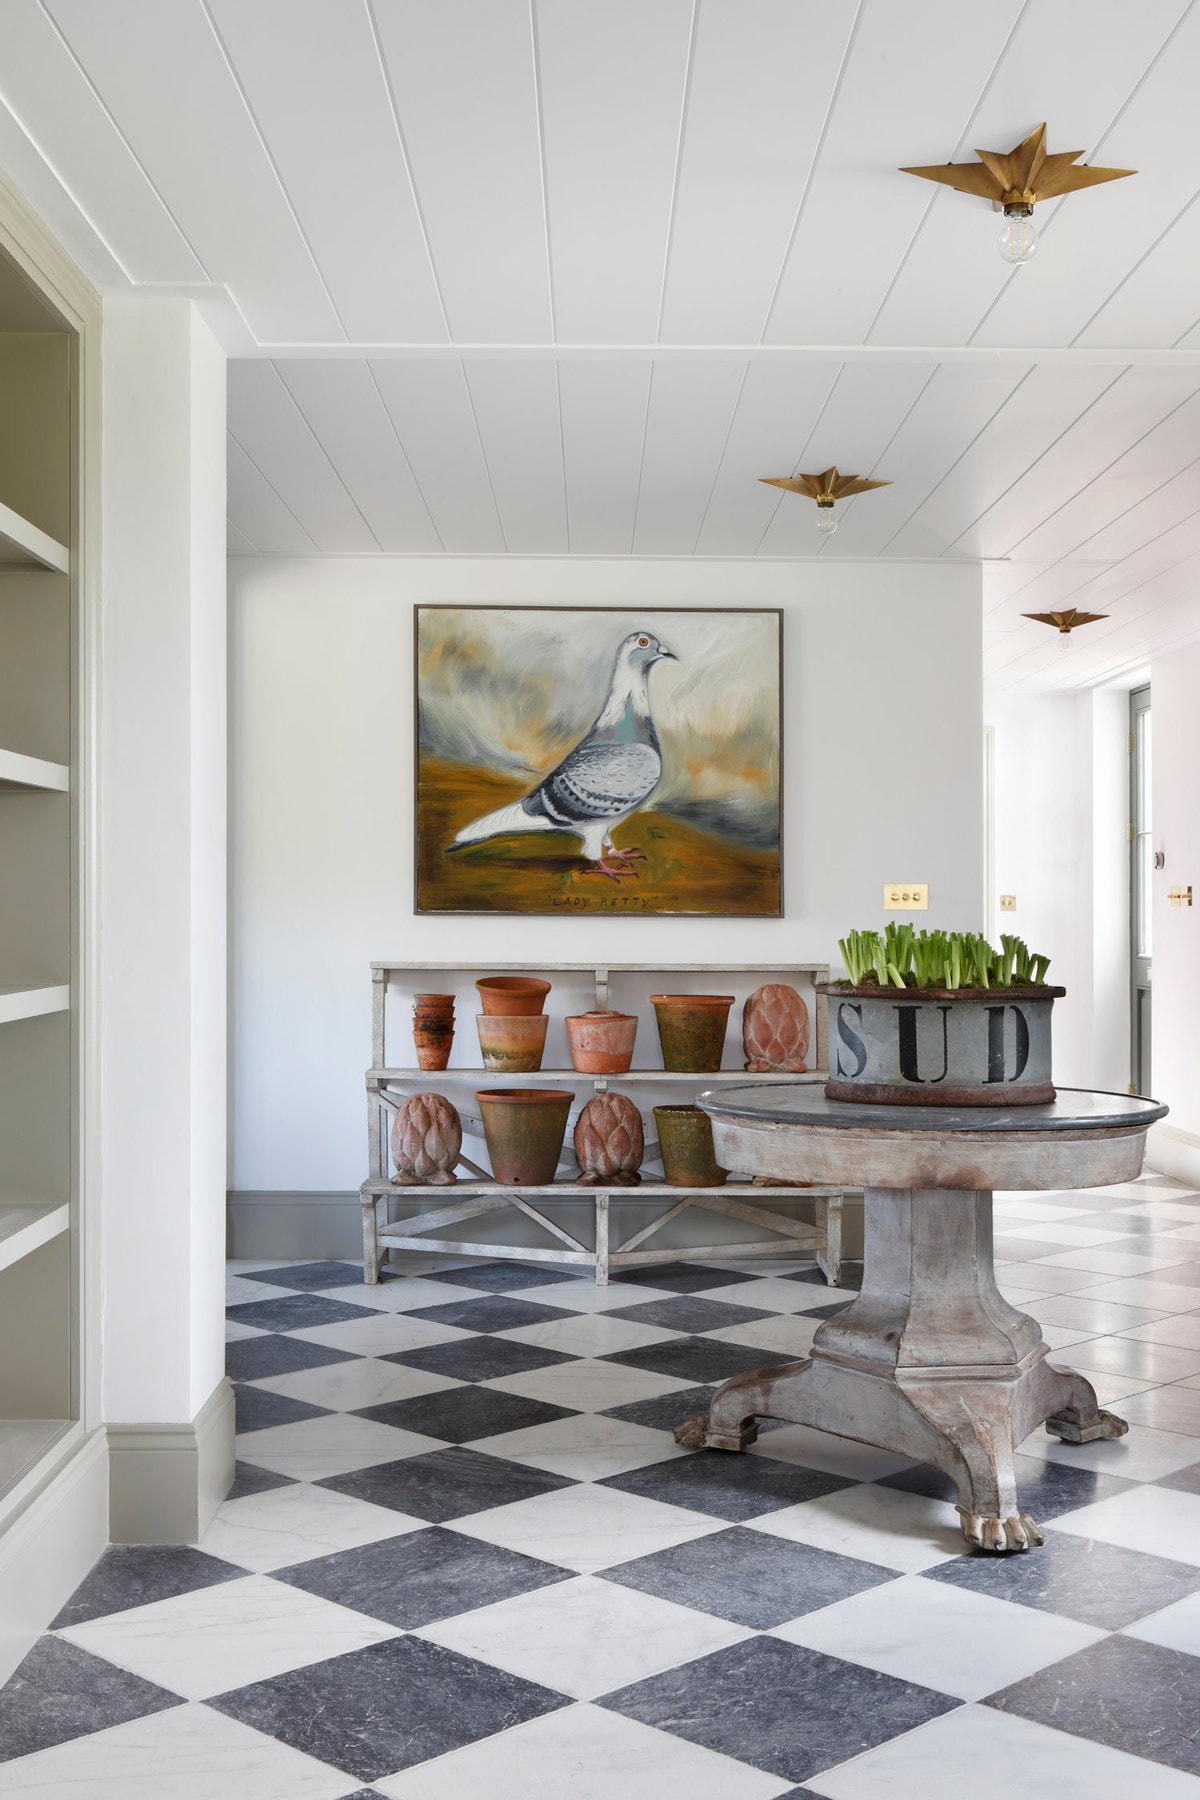 black and white checkerboard floor tile finishes with old-world furniture and home decor pieces